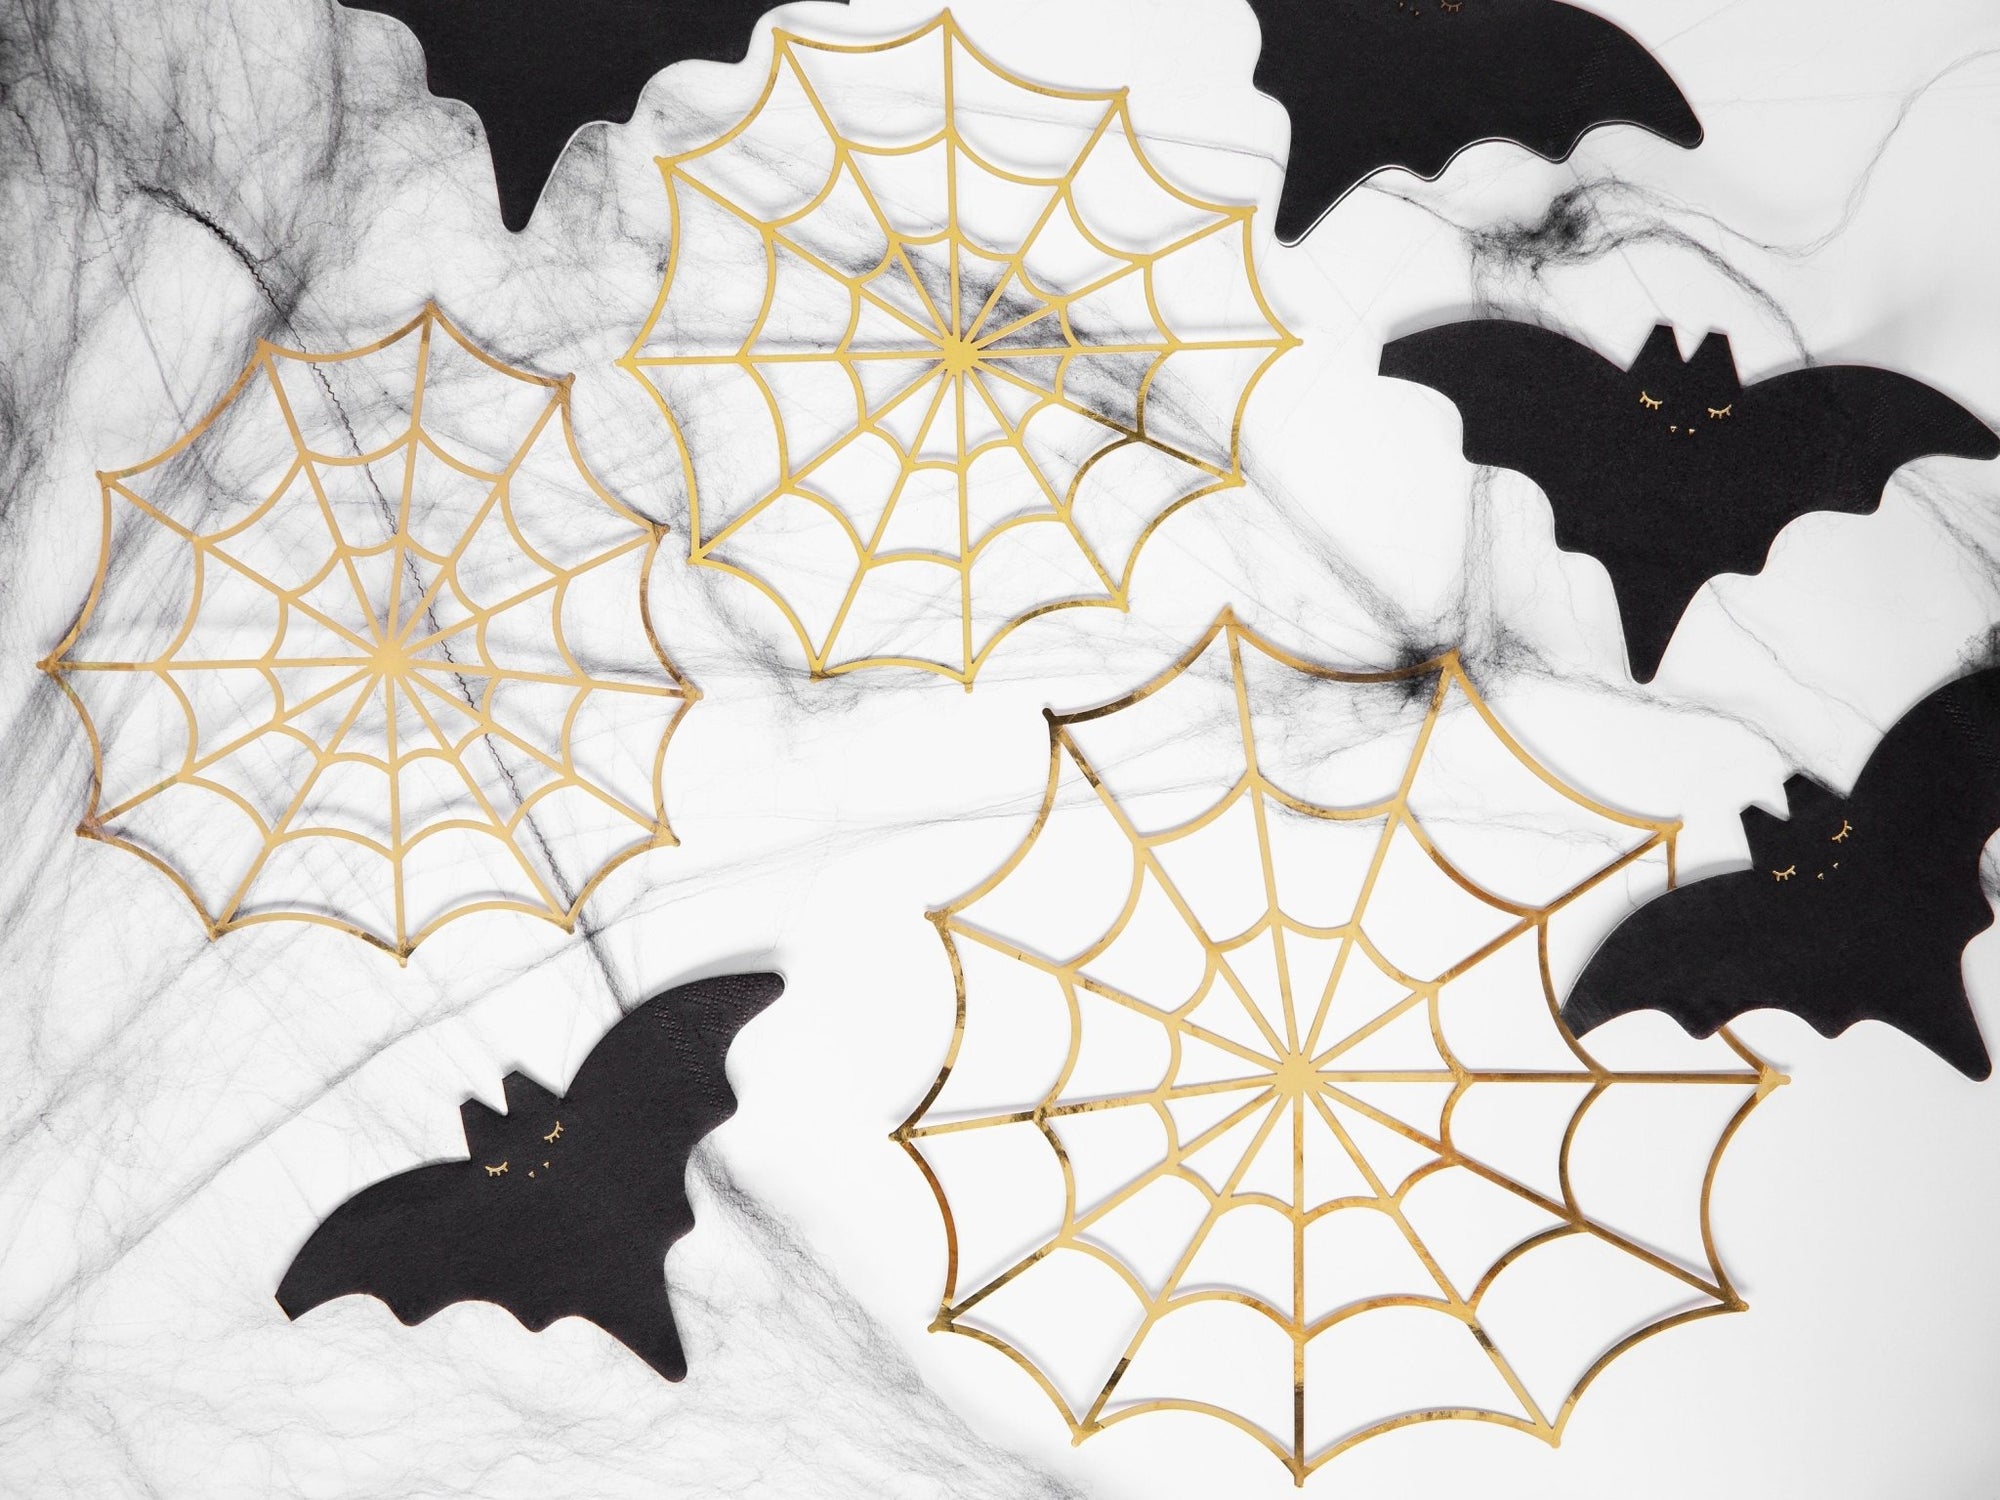 Gold Foil Spider Web Halloween Decorations 3ct - Stesha Party